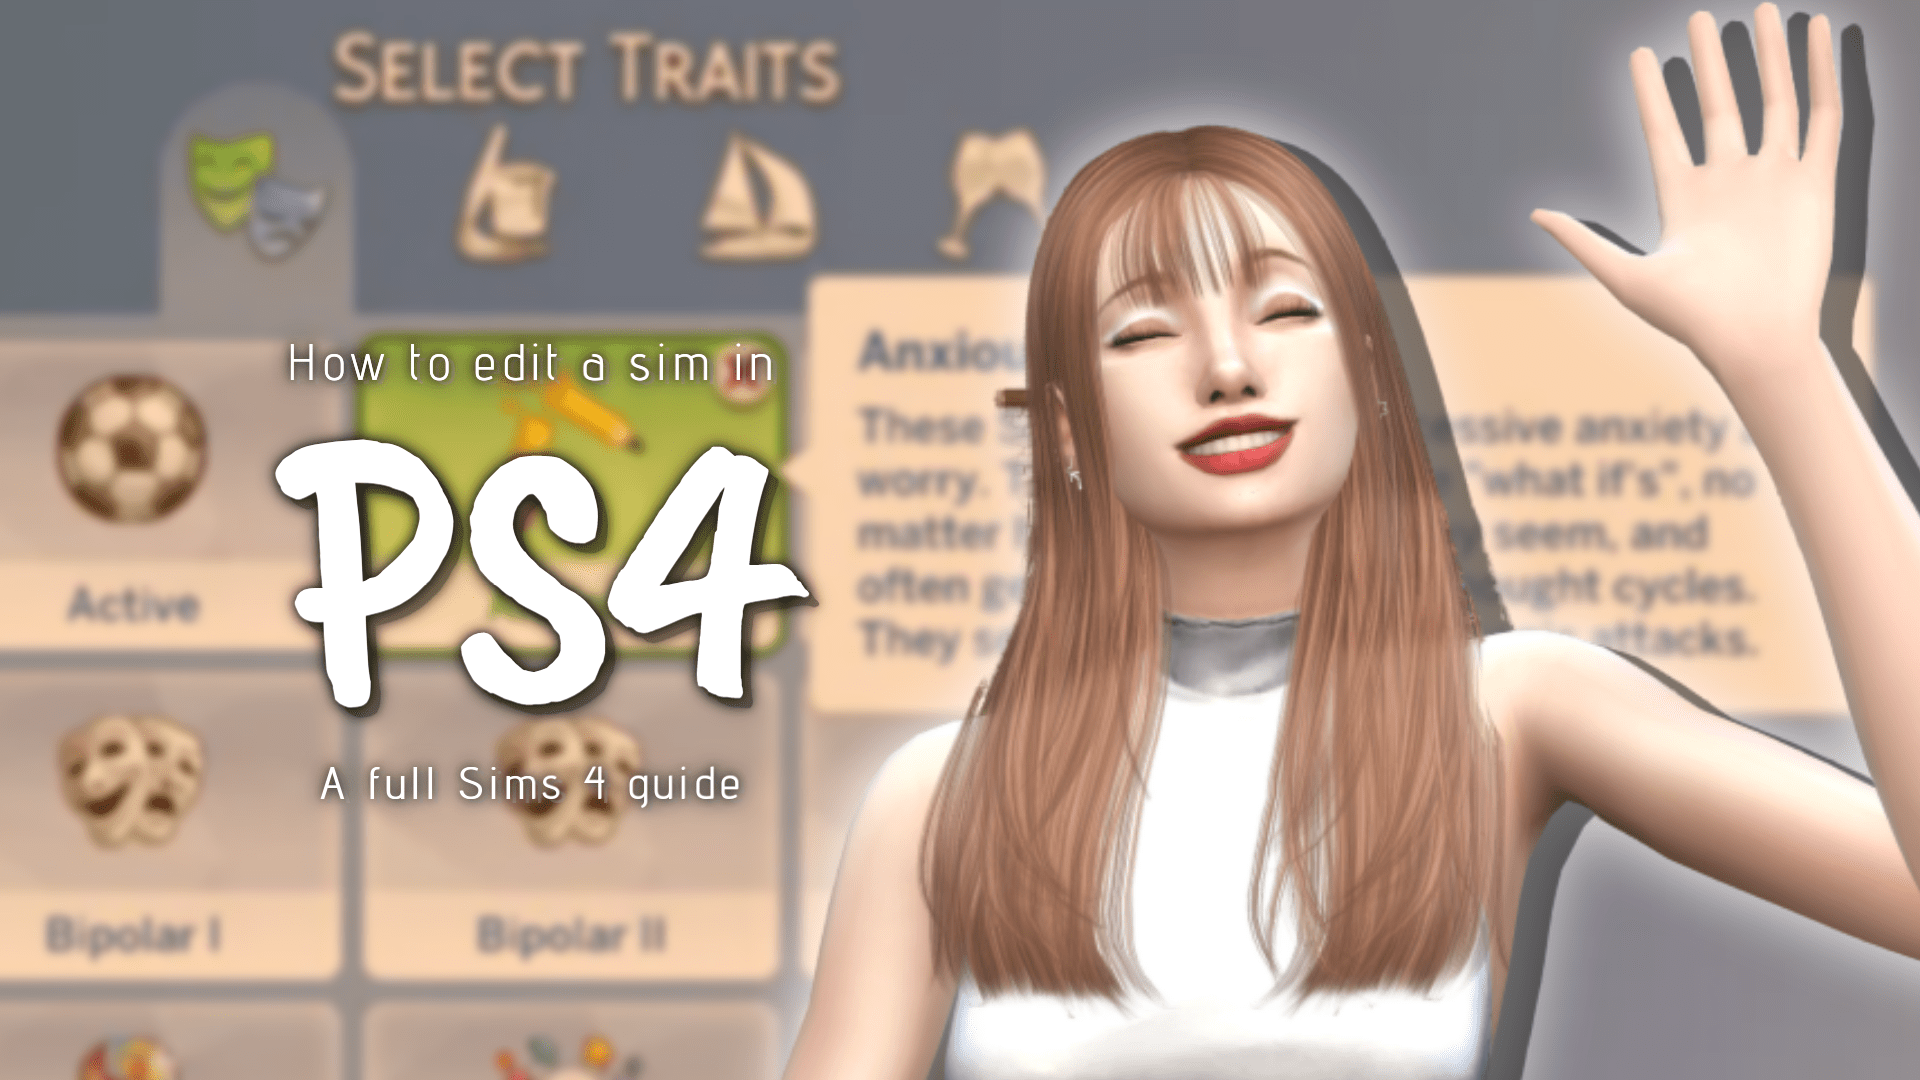 Misforståelse jeans mineral How to Edit a Sim in Sims 4 PS4 – Your Guide - SNOOTYSIMS